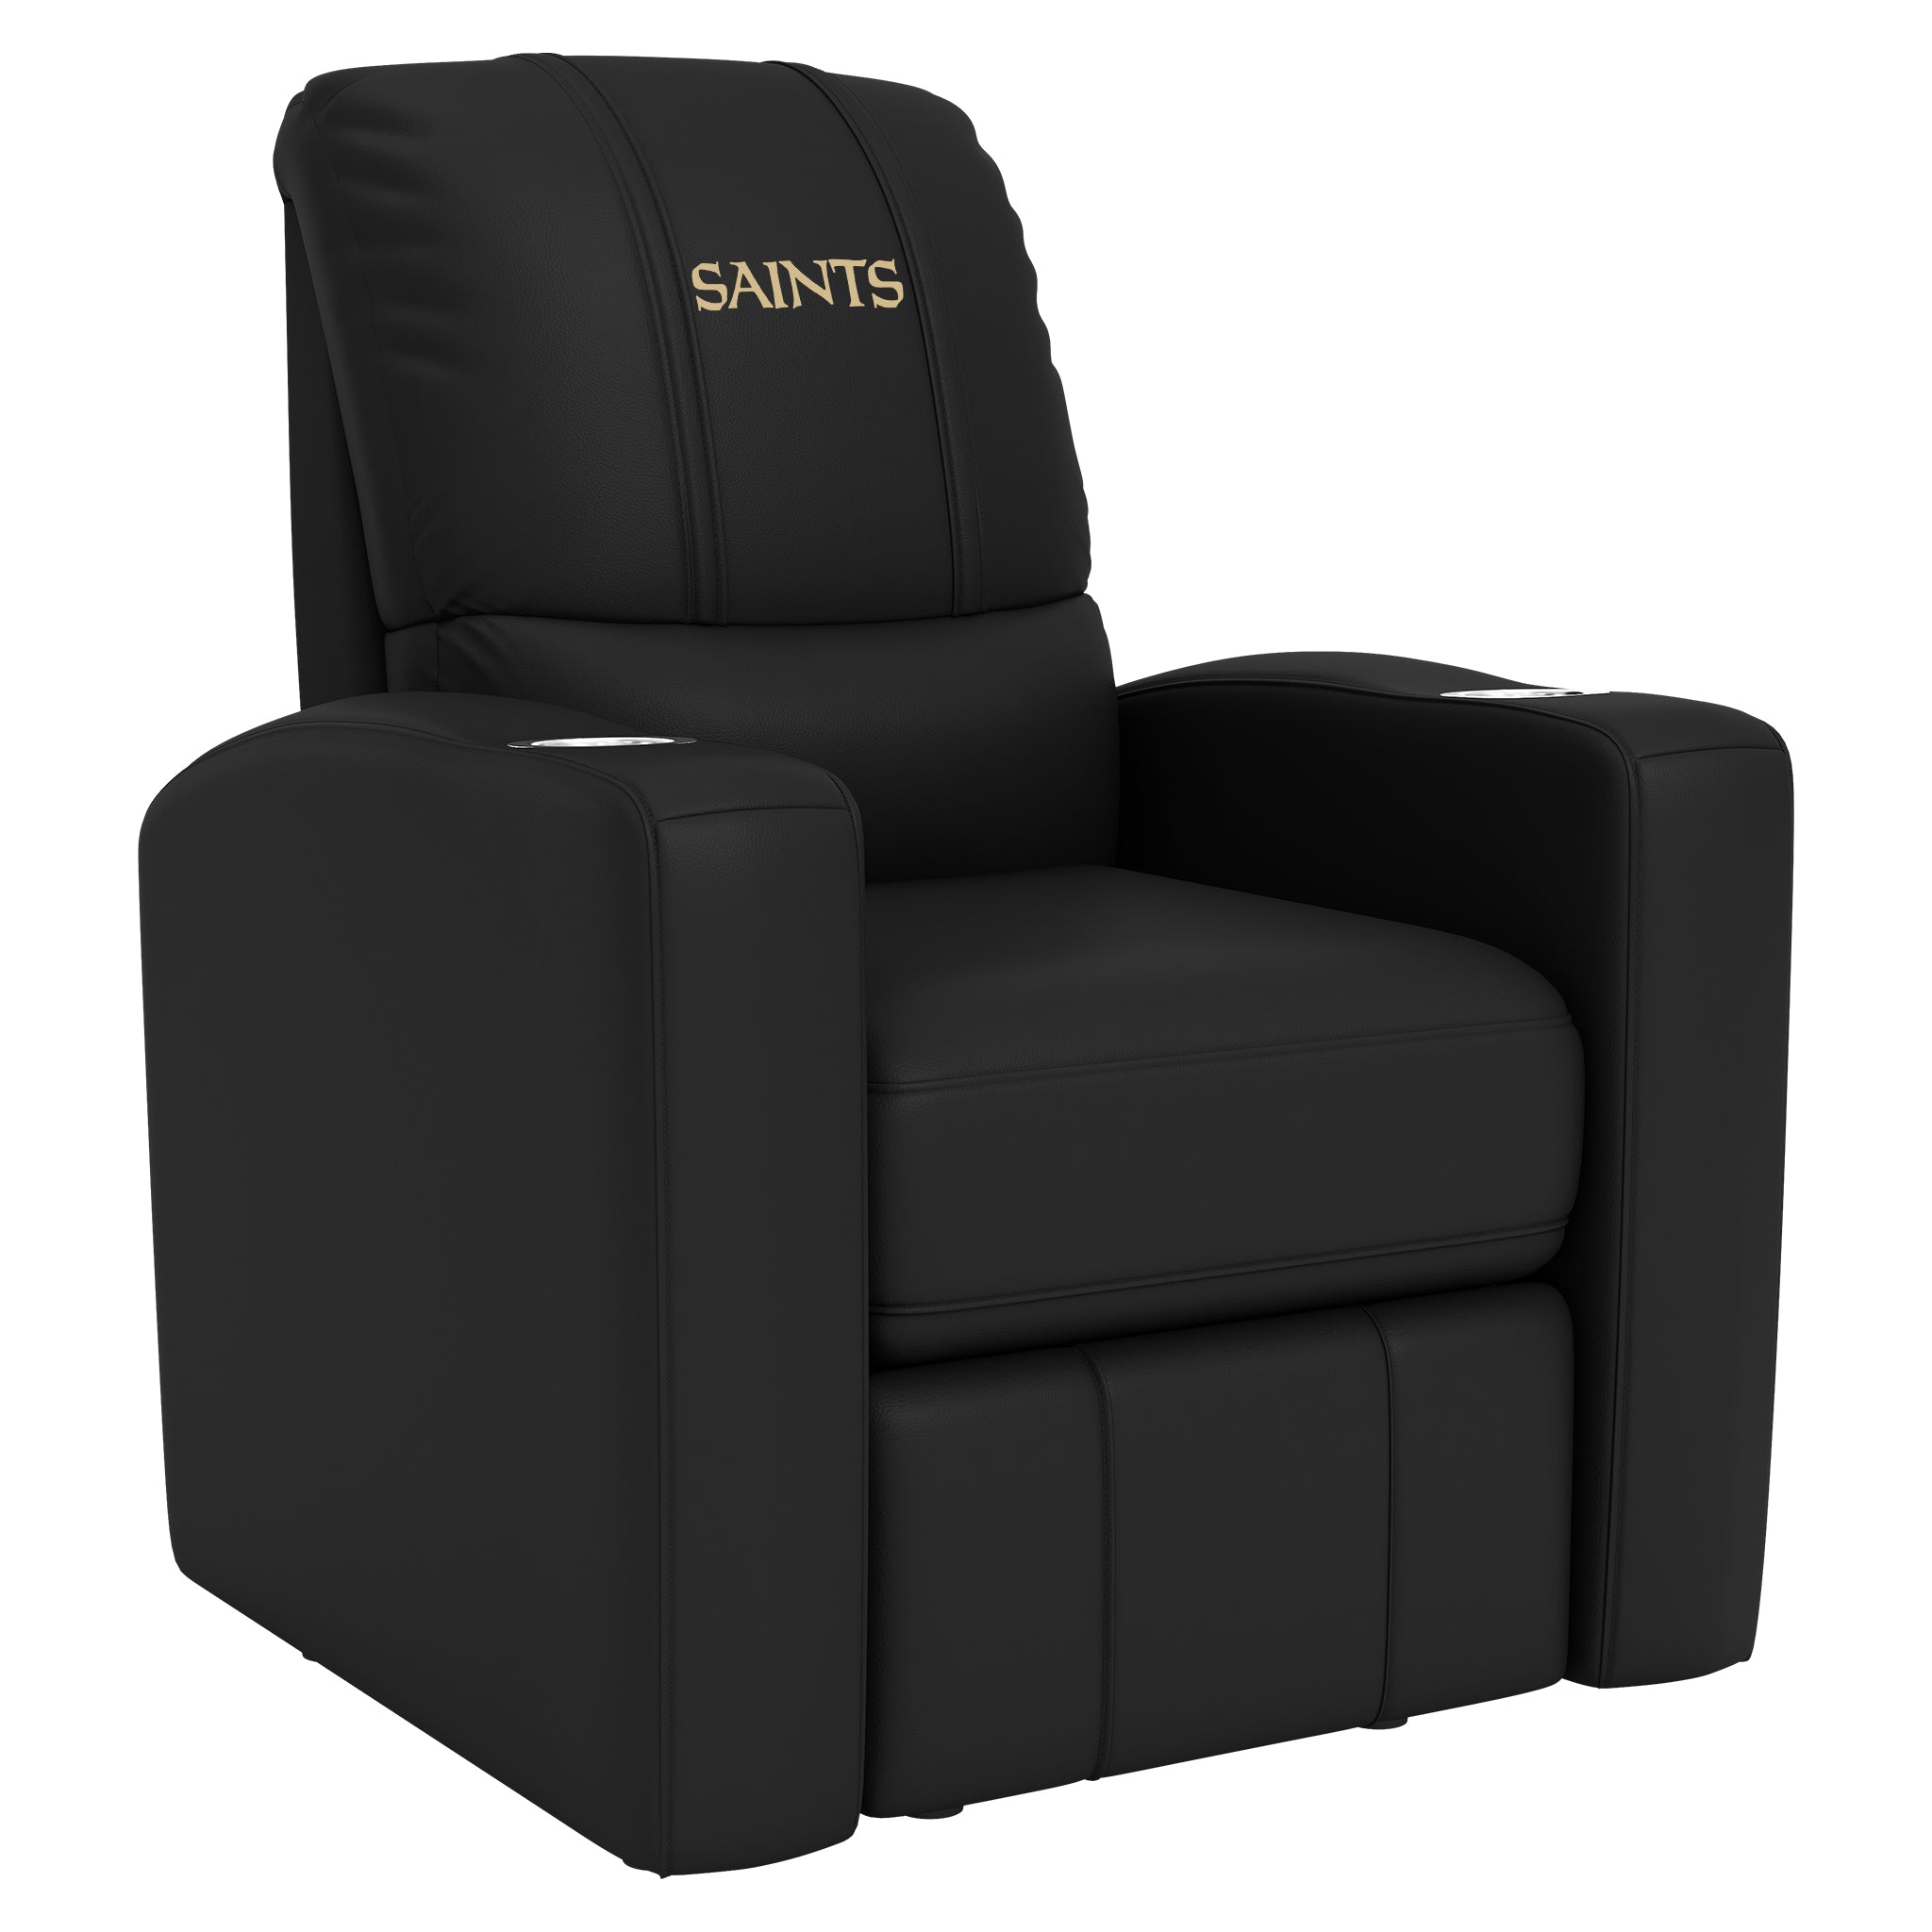 New Orleans Saints Stealth Recliner Manual